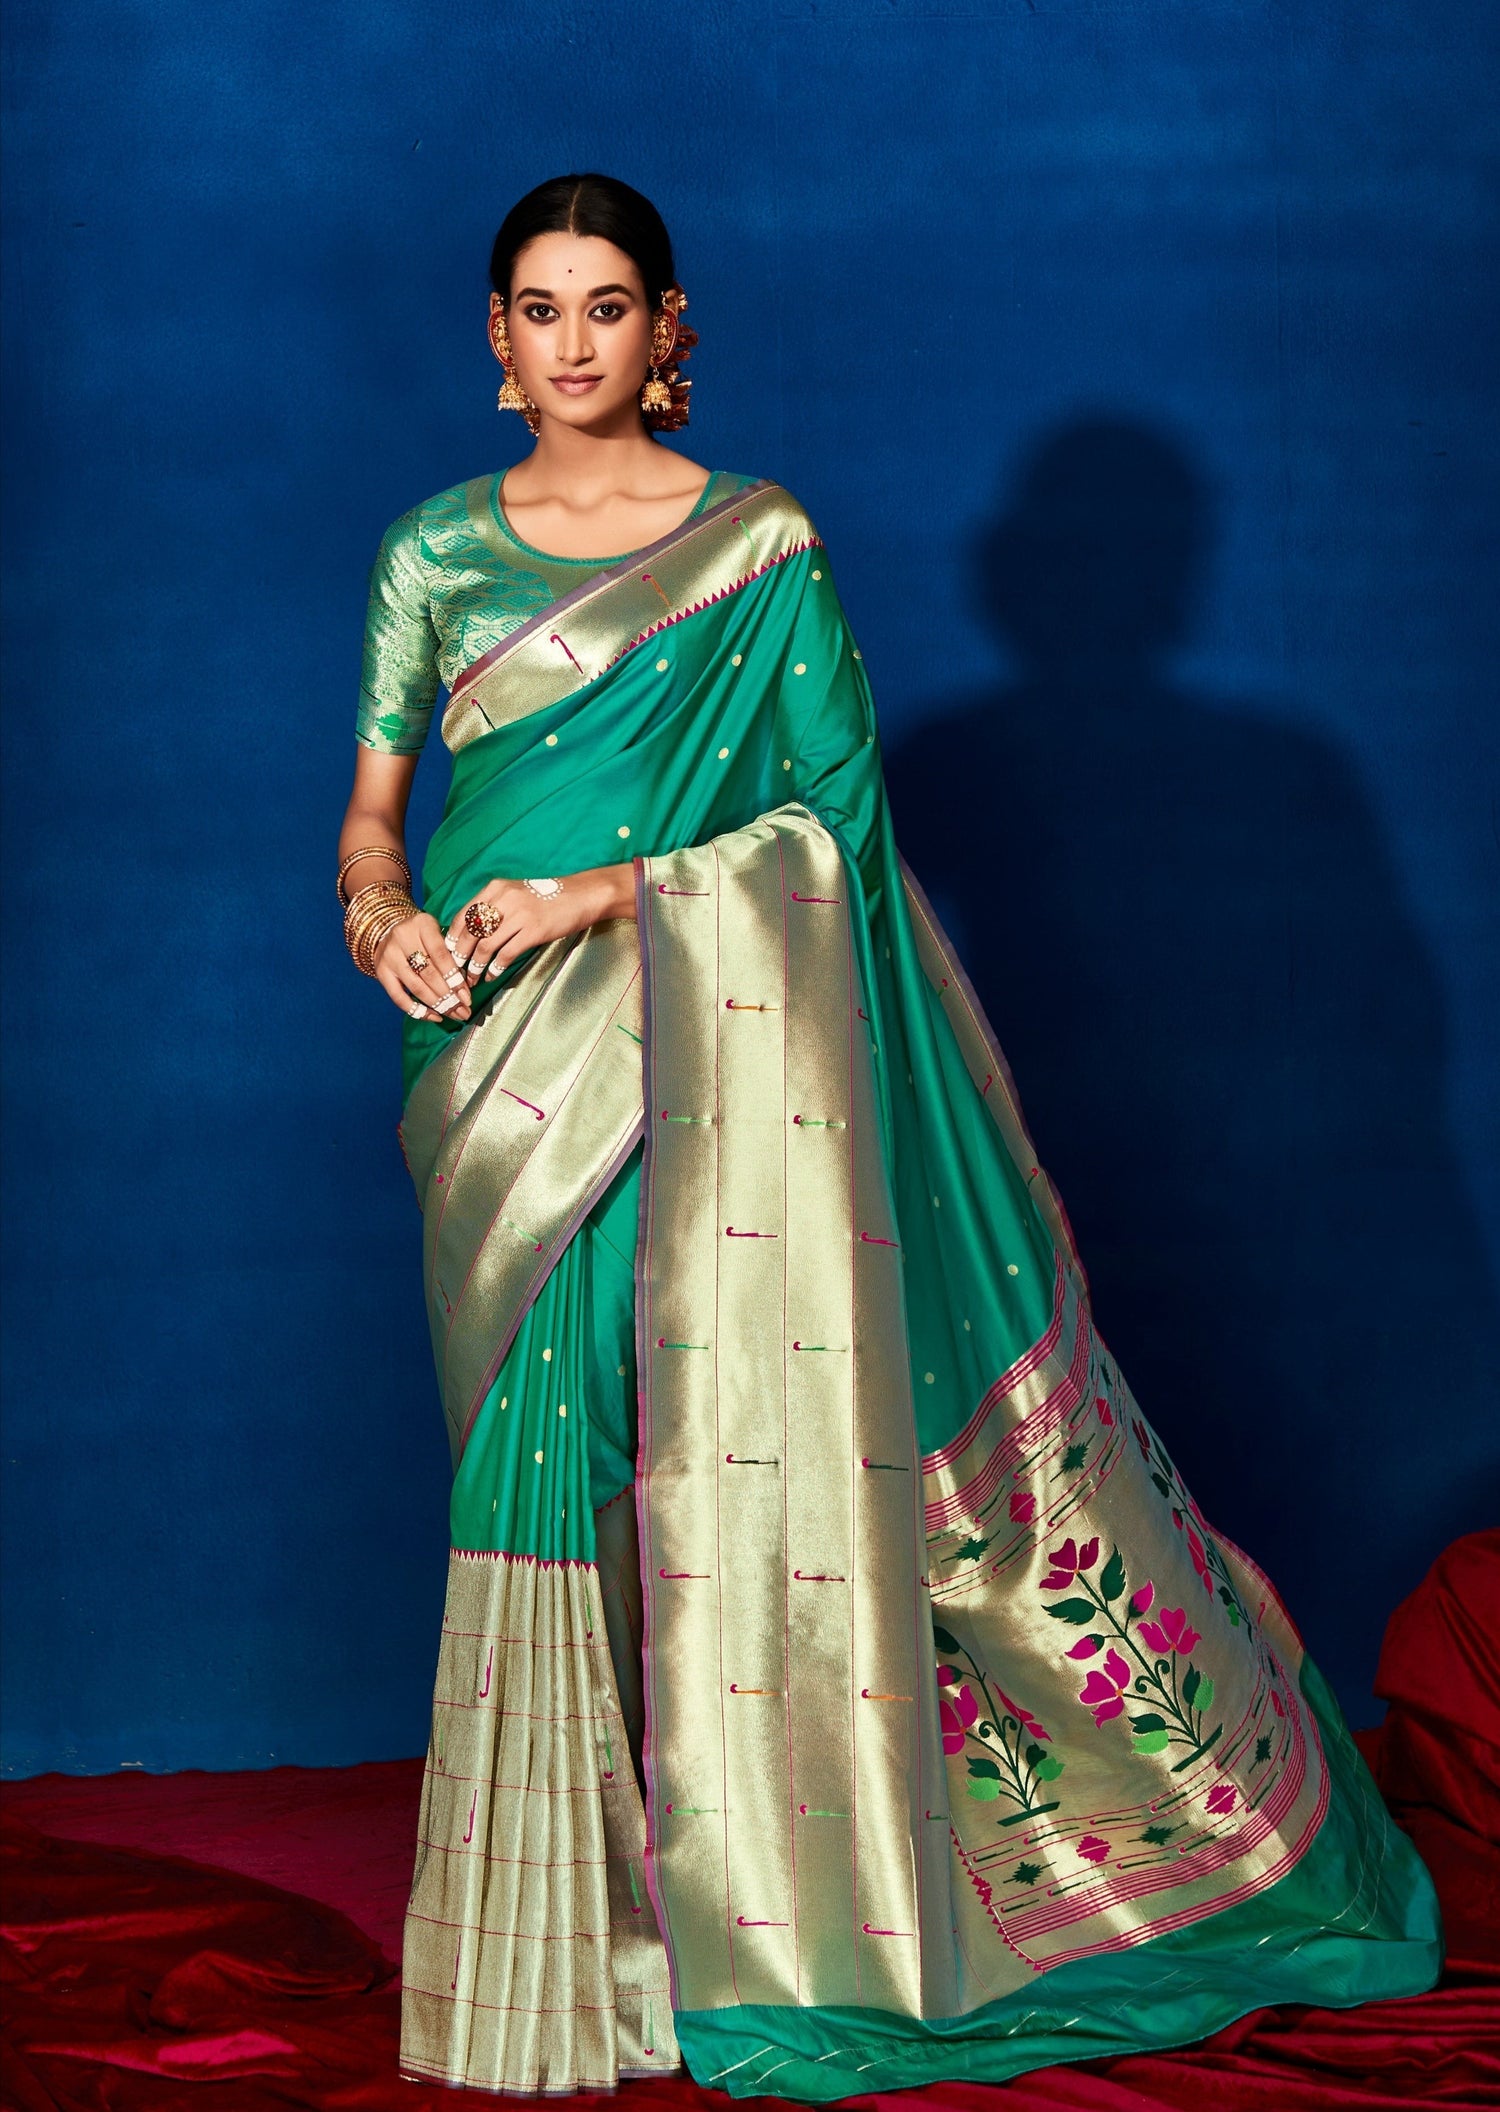 Woman in Green silk saree standing in front of blue wall